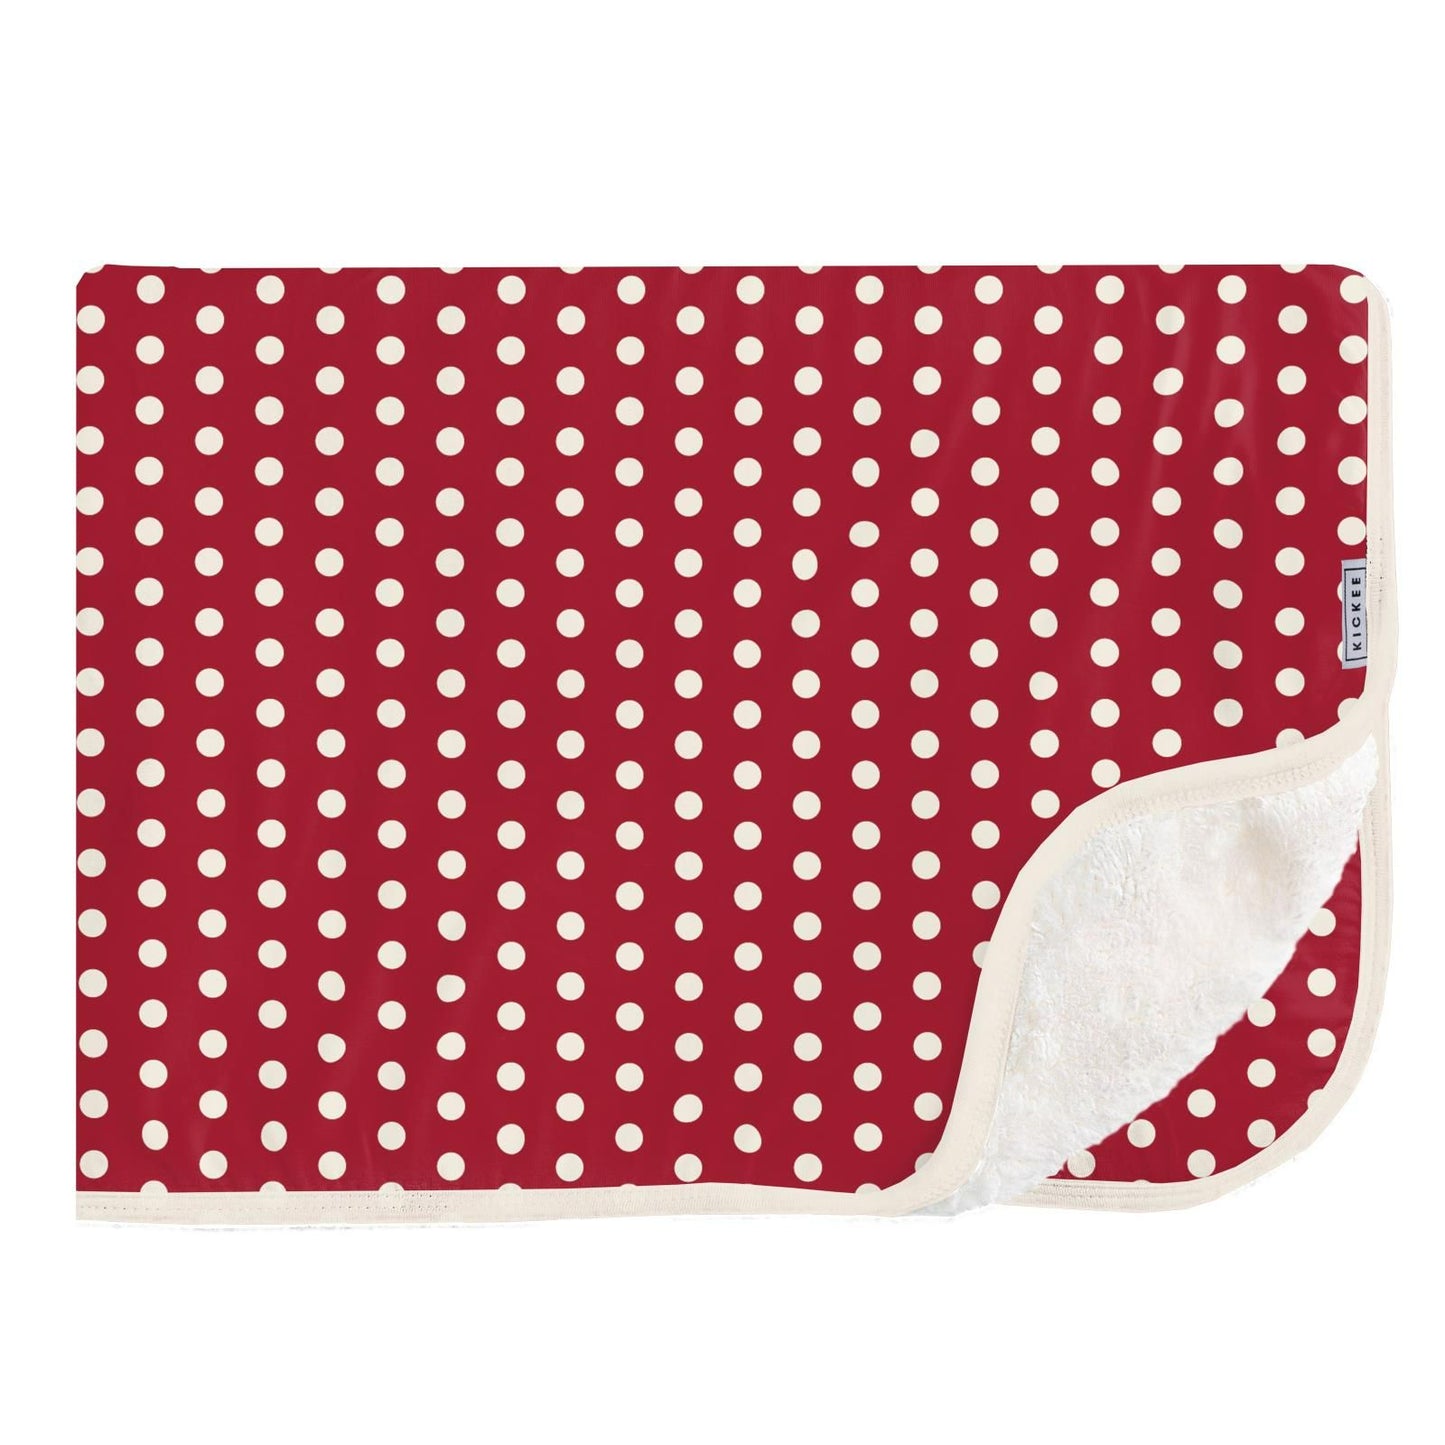 Throw Blanket with Sherpa Backing - Candy Apple Polka Dots